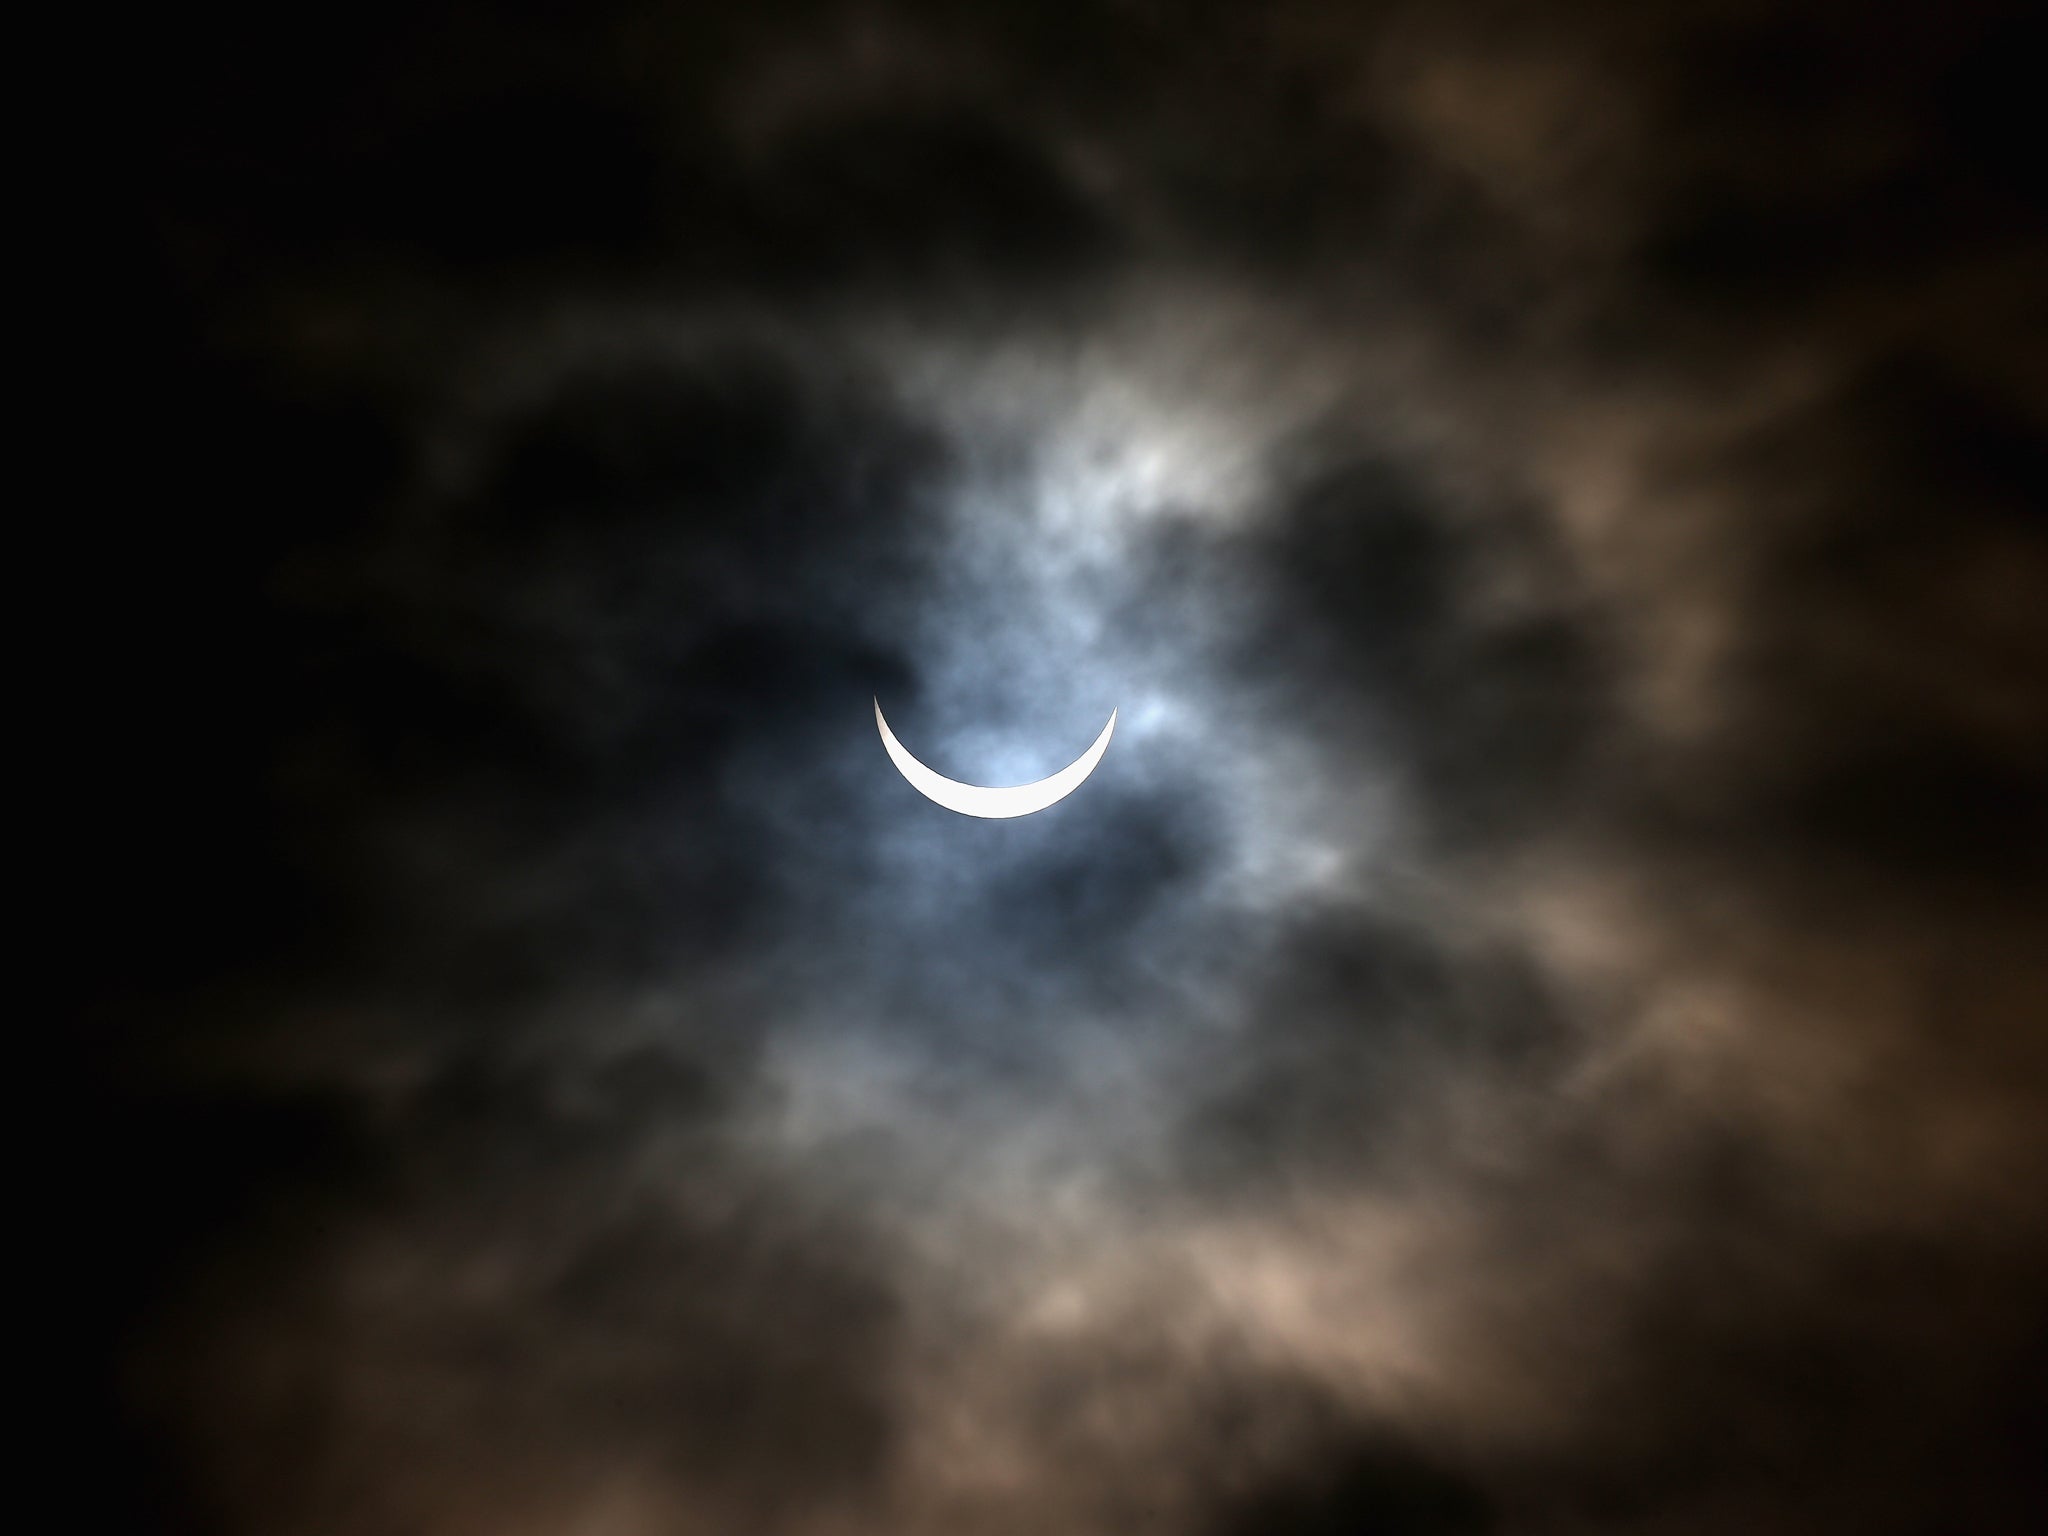 A rare partial solar eclipse is seen over Northamptonshire on March 20, 2015 in Northampton, England